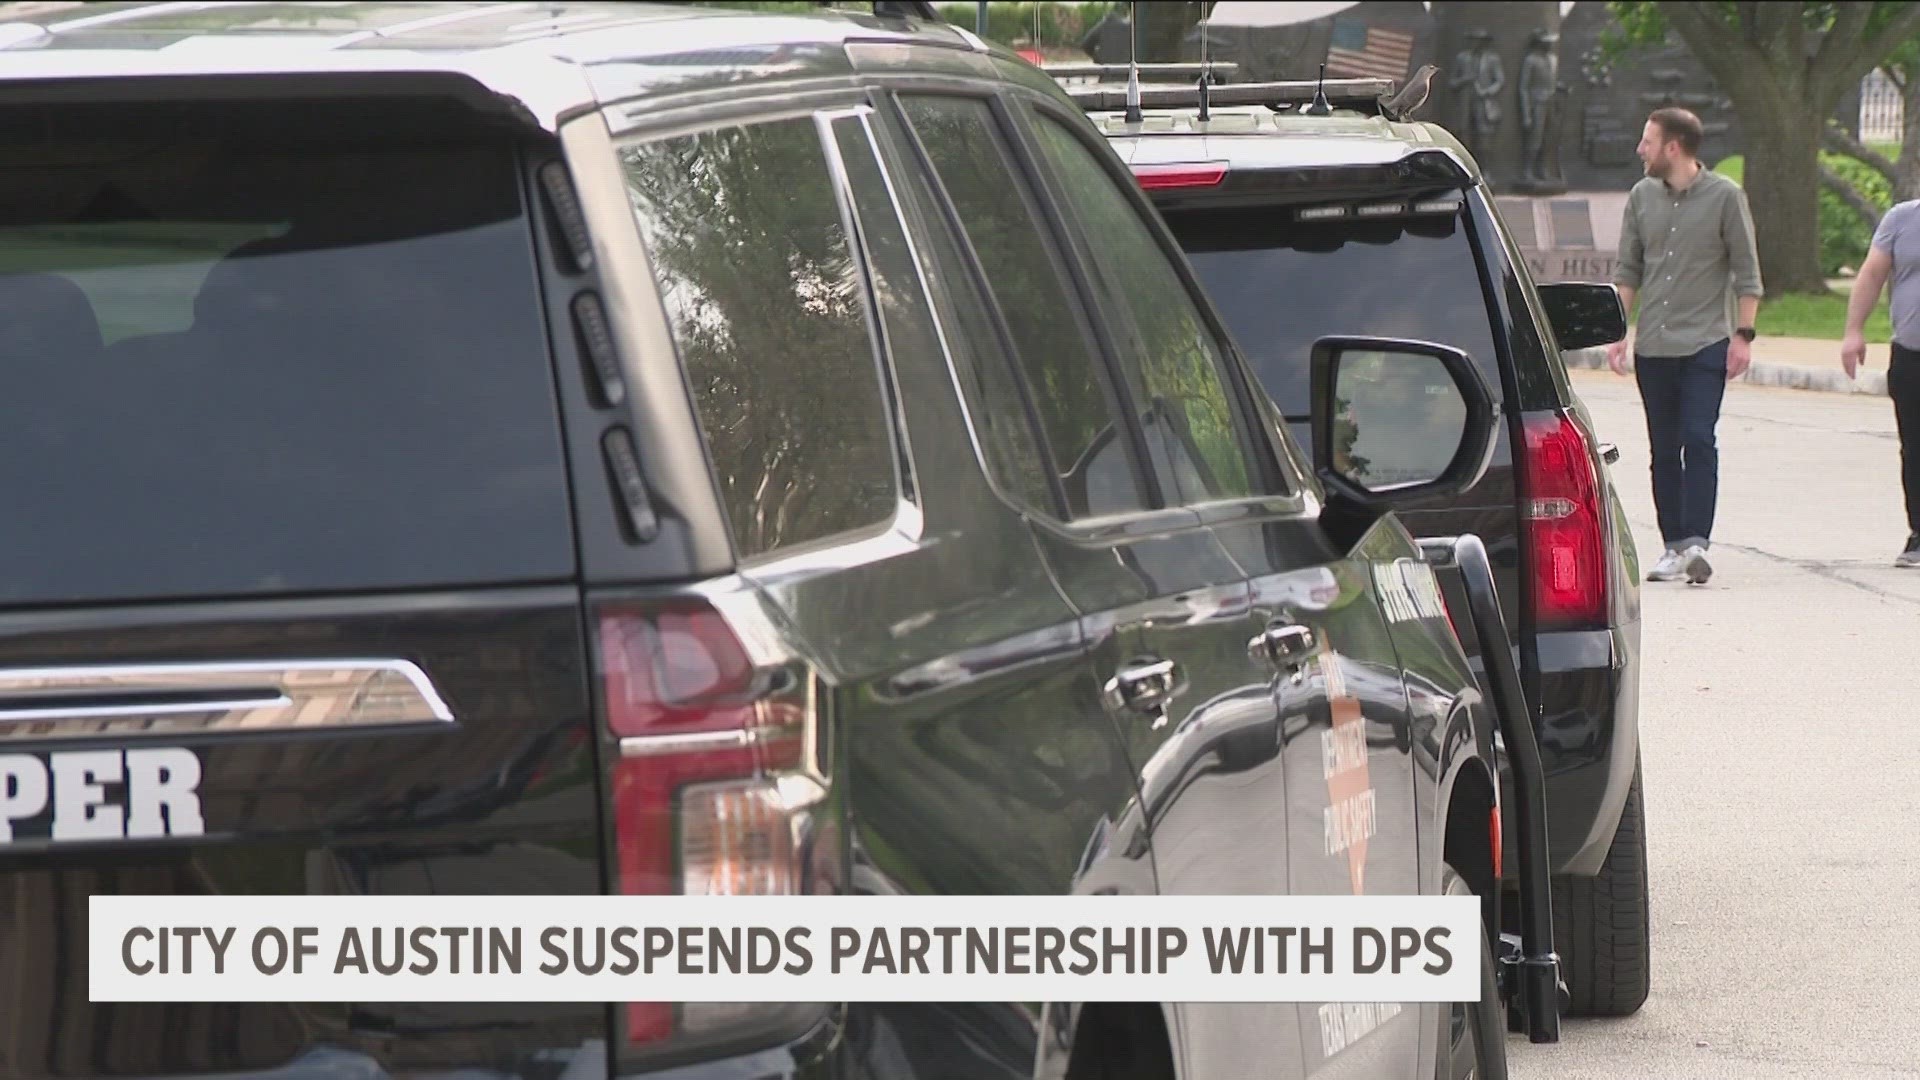 Austin has suspended its partnership with DPS. It comes as an Austin father is claiming a trooper pulled a gun on him and his 10-year-old son.